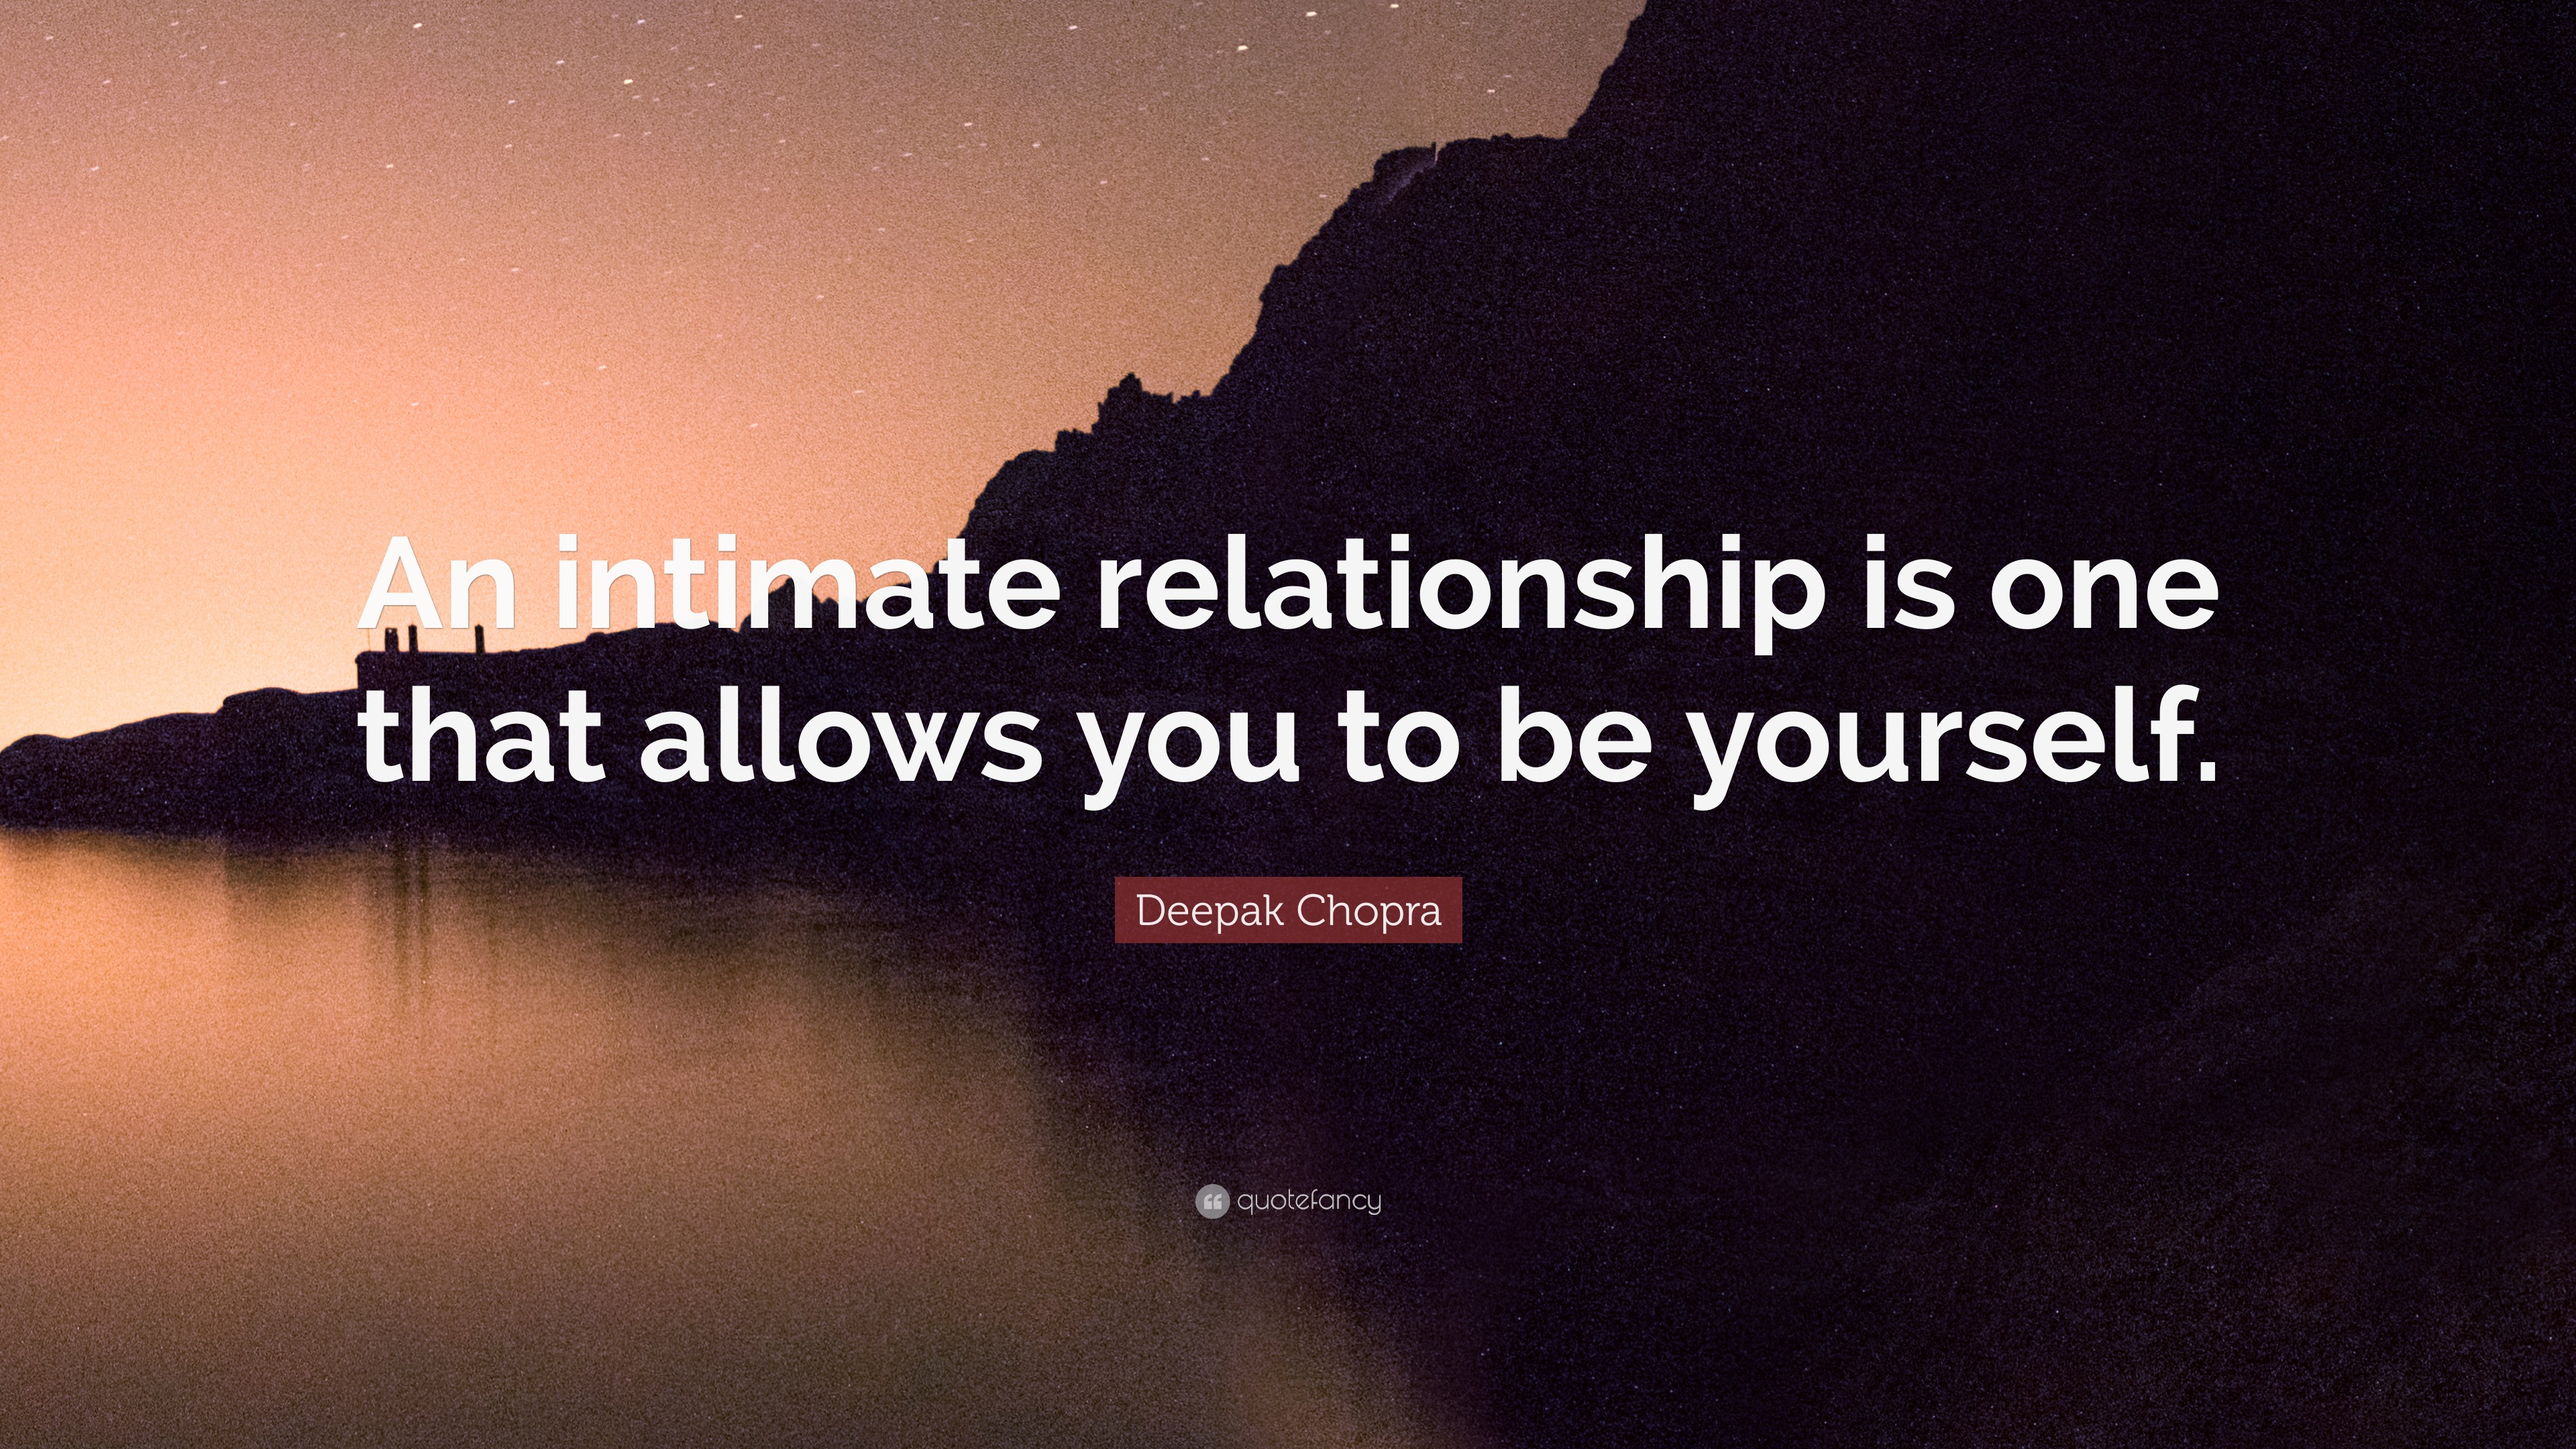 Deepak Chopra Quote An Intimate Relationship Is One That Allows You To Be Yourself 7 Wallpapers Quotefancy